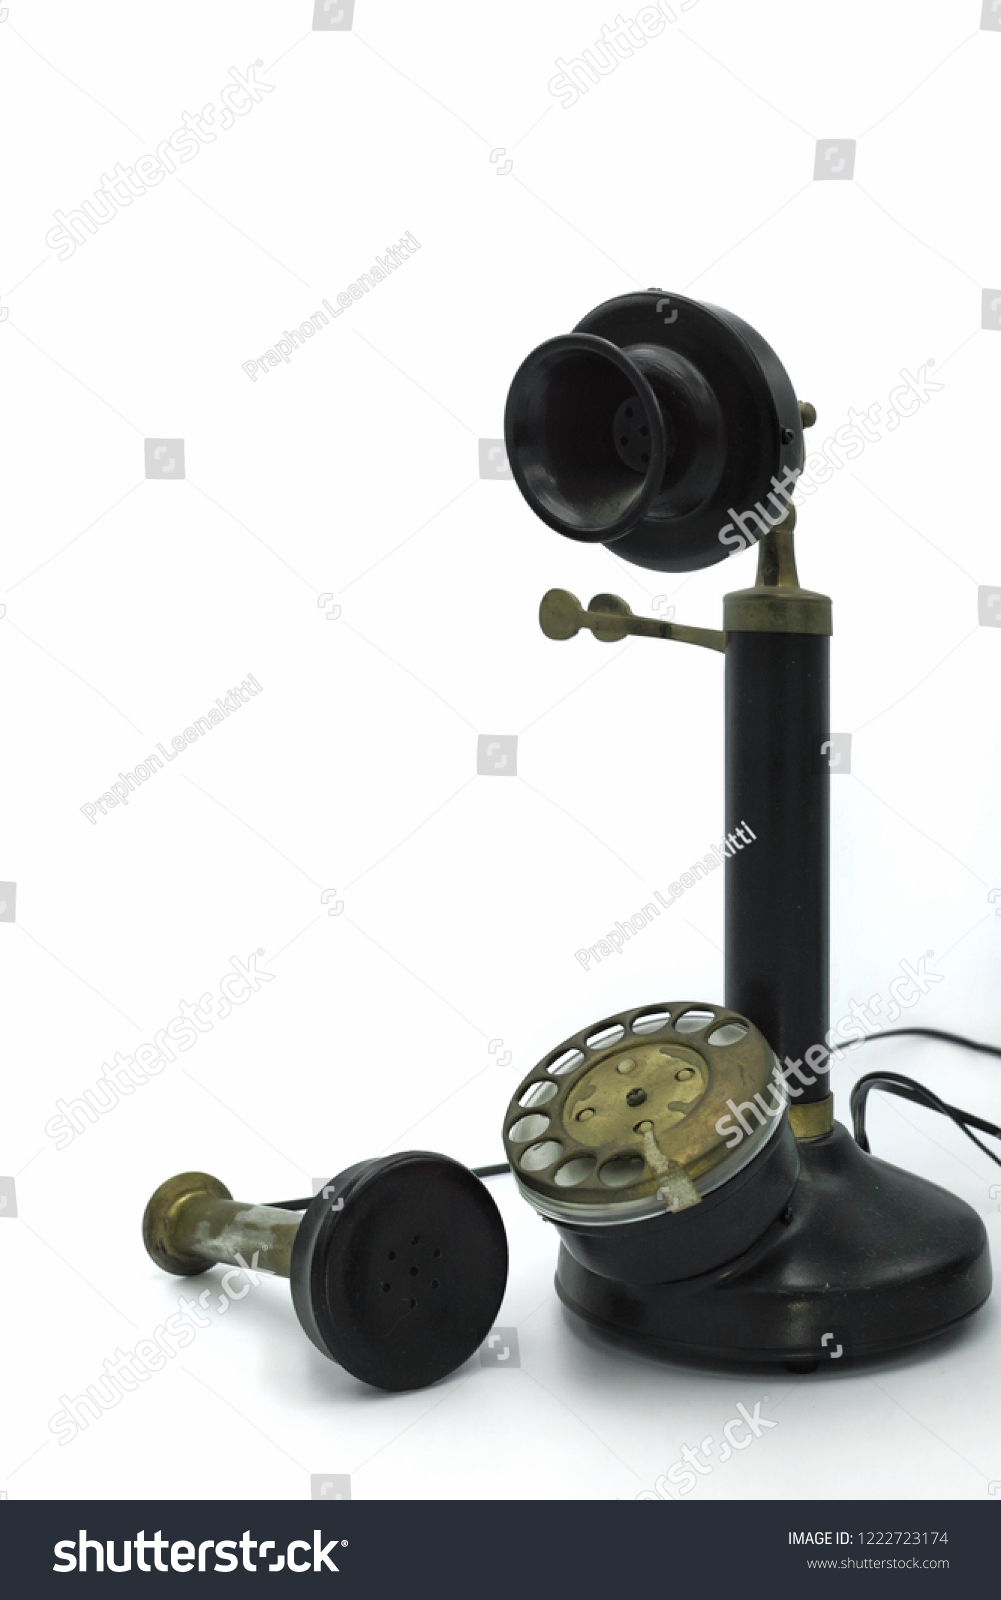 The replica of candlestick telephone. Candlestick telephone is a vintage telephone that was used very long time ago also calls as a desk stand phone, an upright, or a stick phone. #1222723174